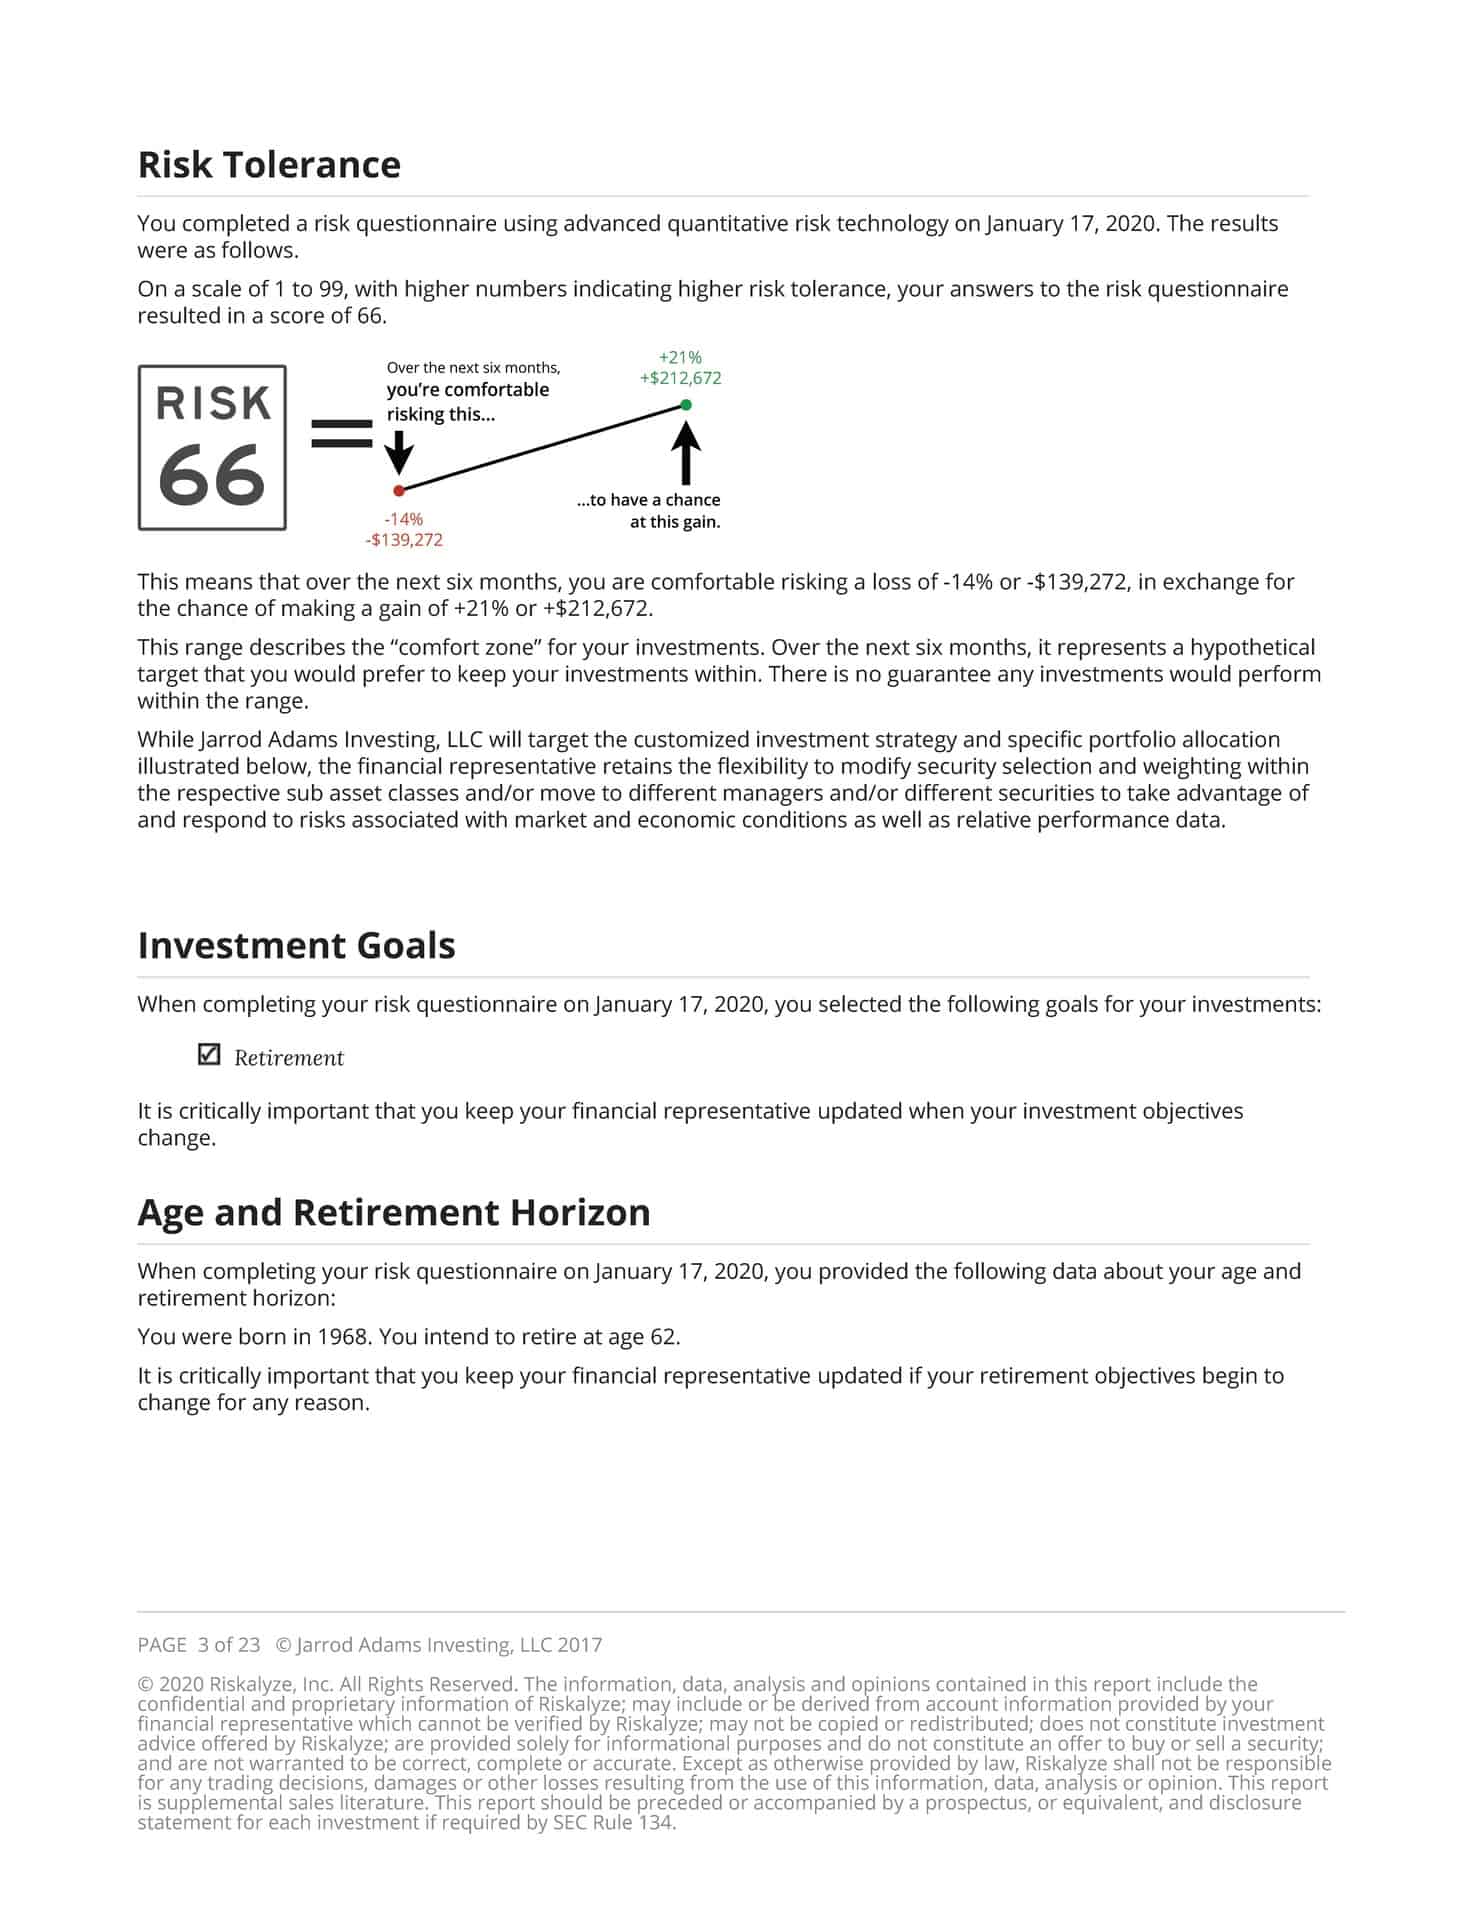 sample-client-investment-report-extra-page-1-jarrod-adams